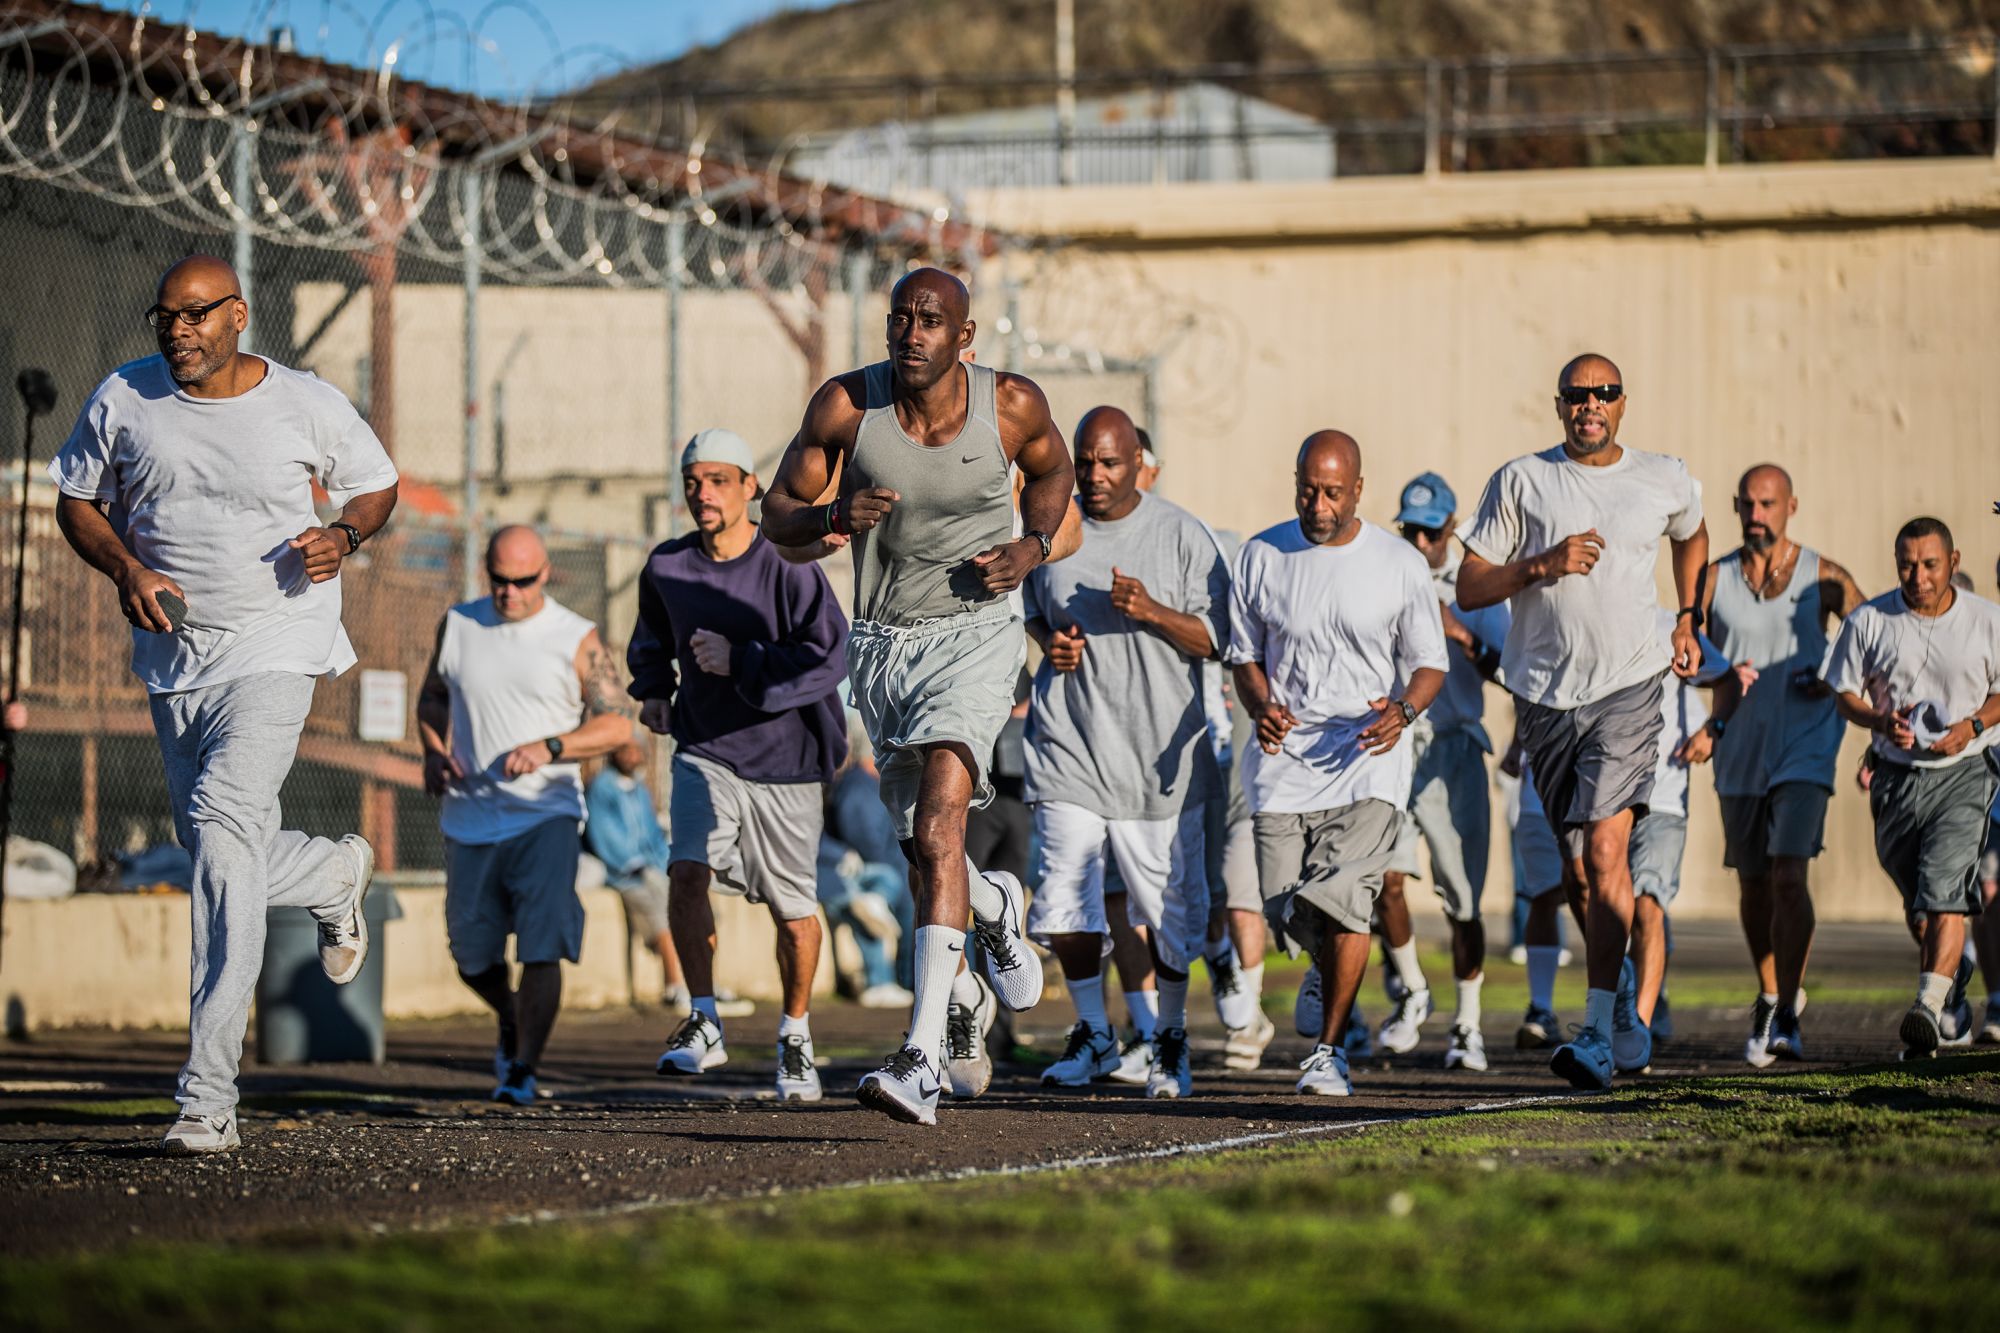 Inmates run 105 laps of the prison yard in order to complete the marathon.